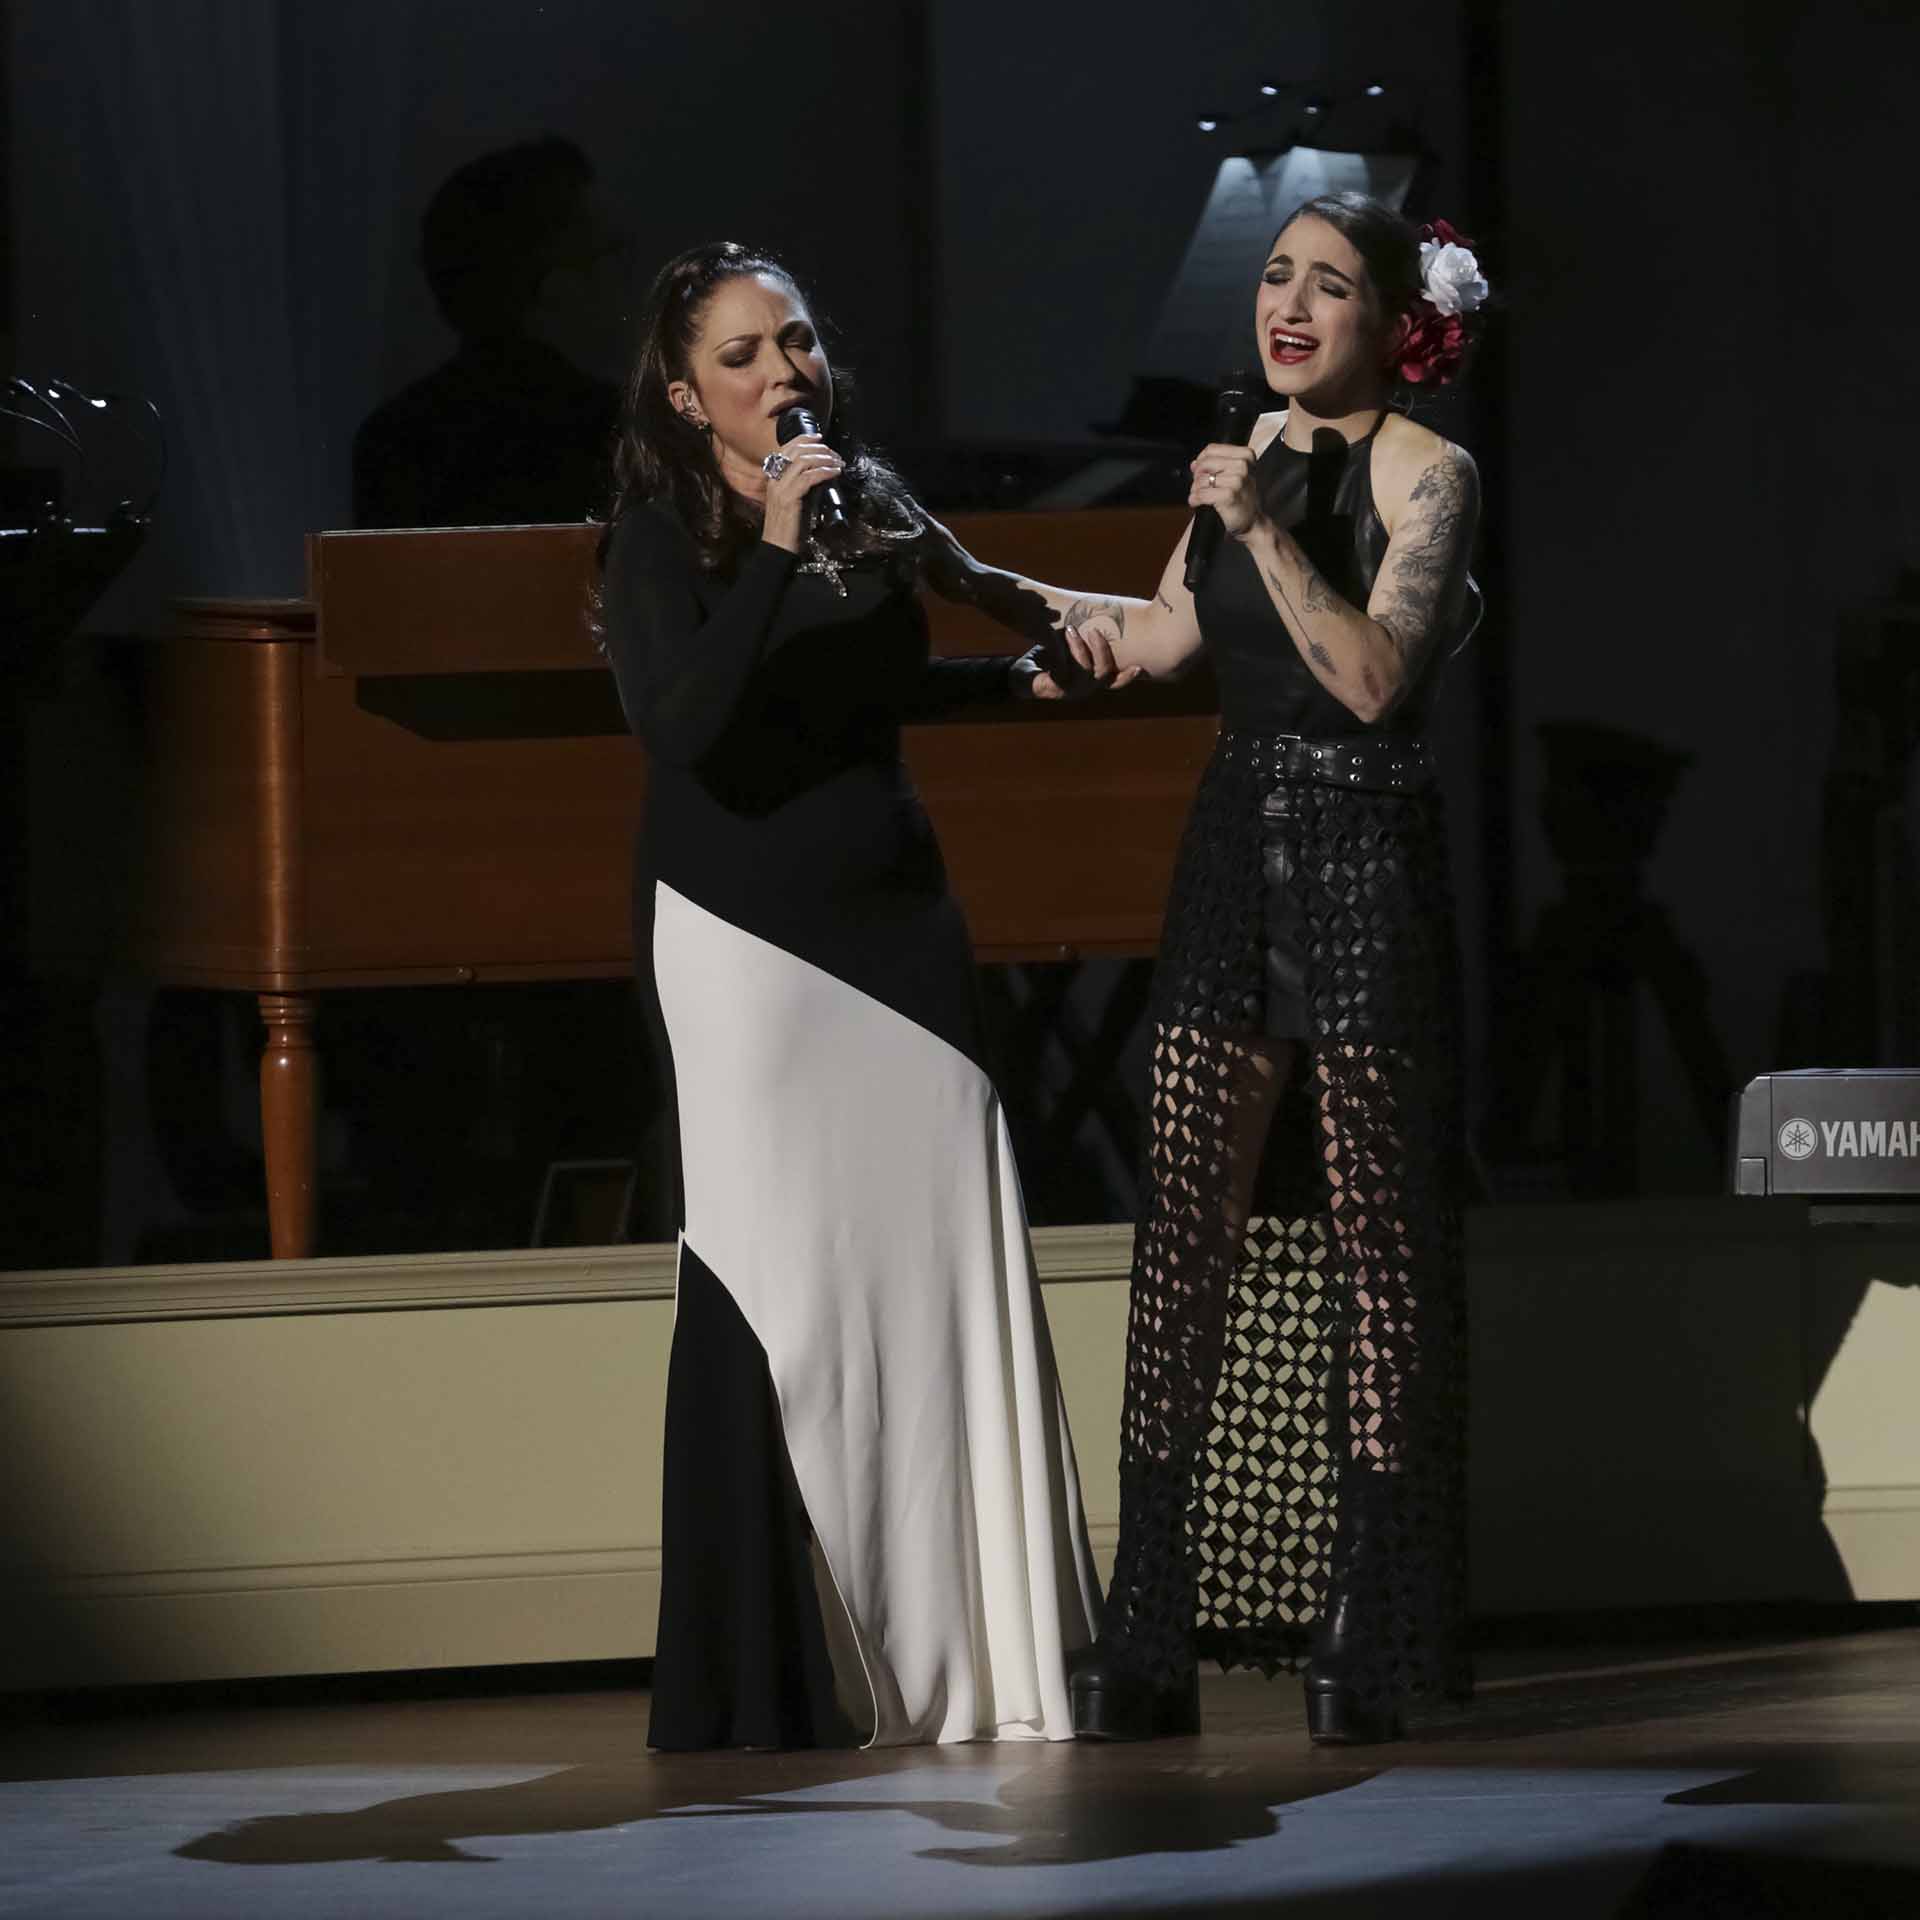 Singer Gloria Estefan and daughter Emily Estefan attending the Library of Congress Gershwin Prize on Wednesday, March 13, 2019, in Washington.